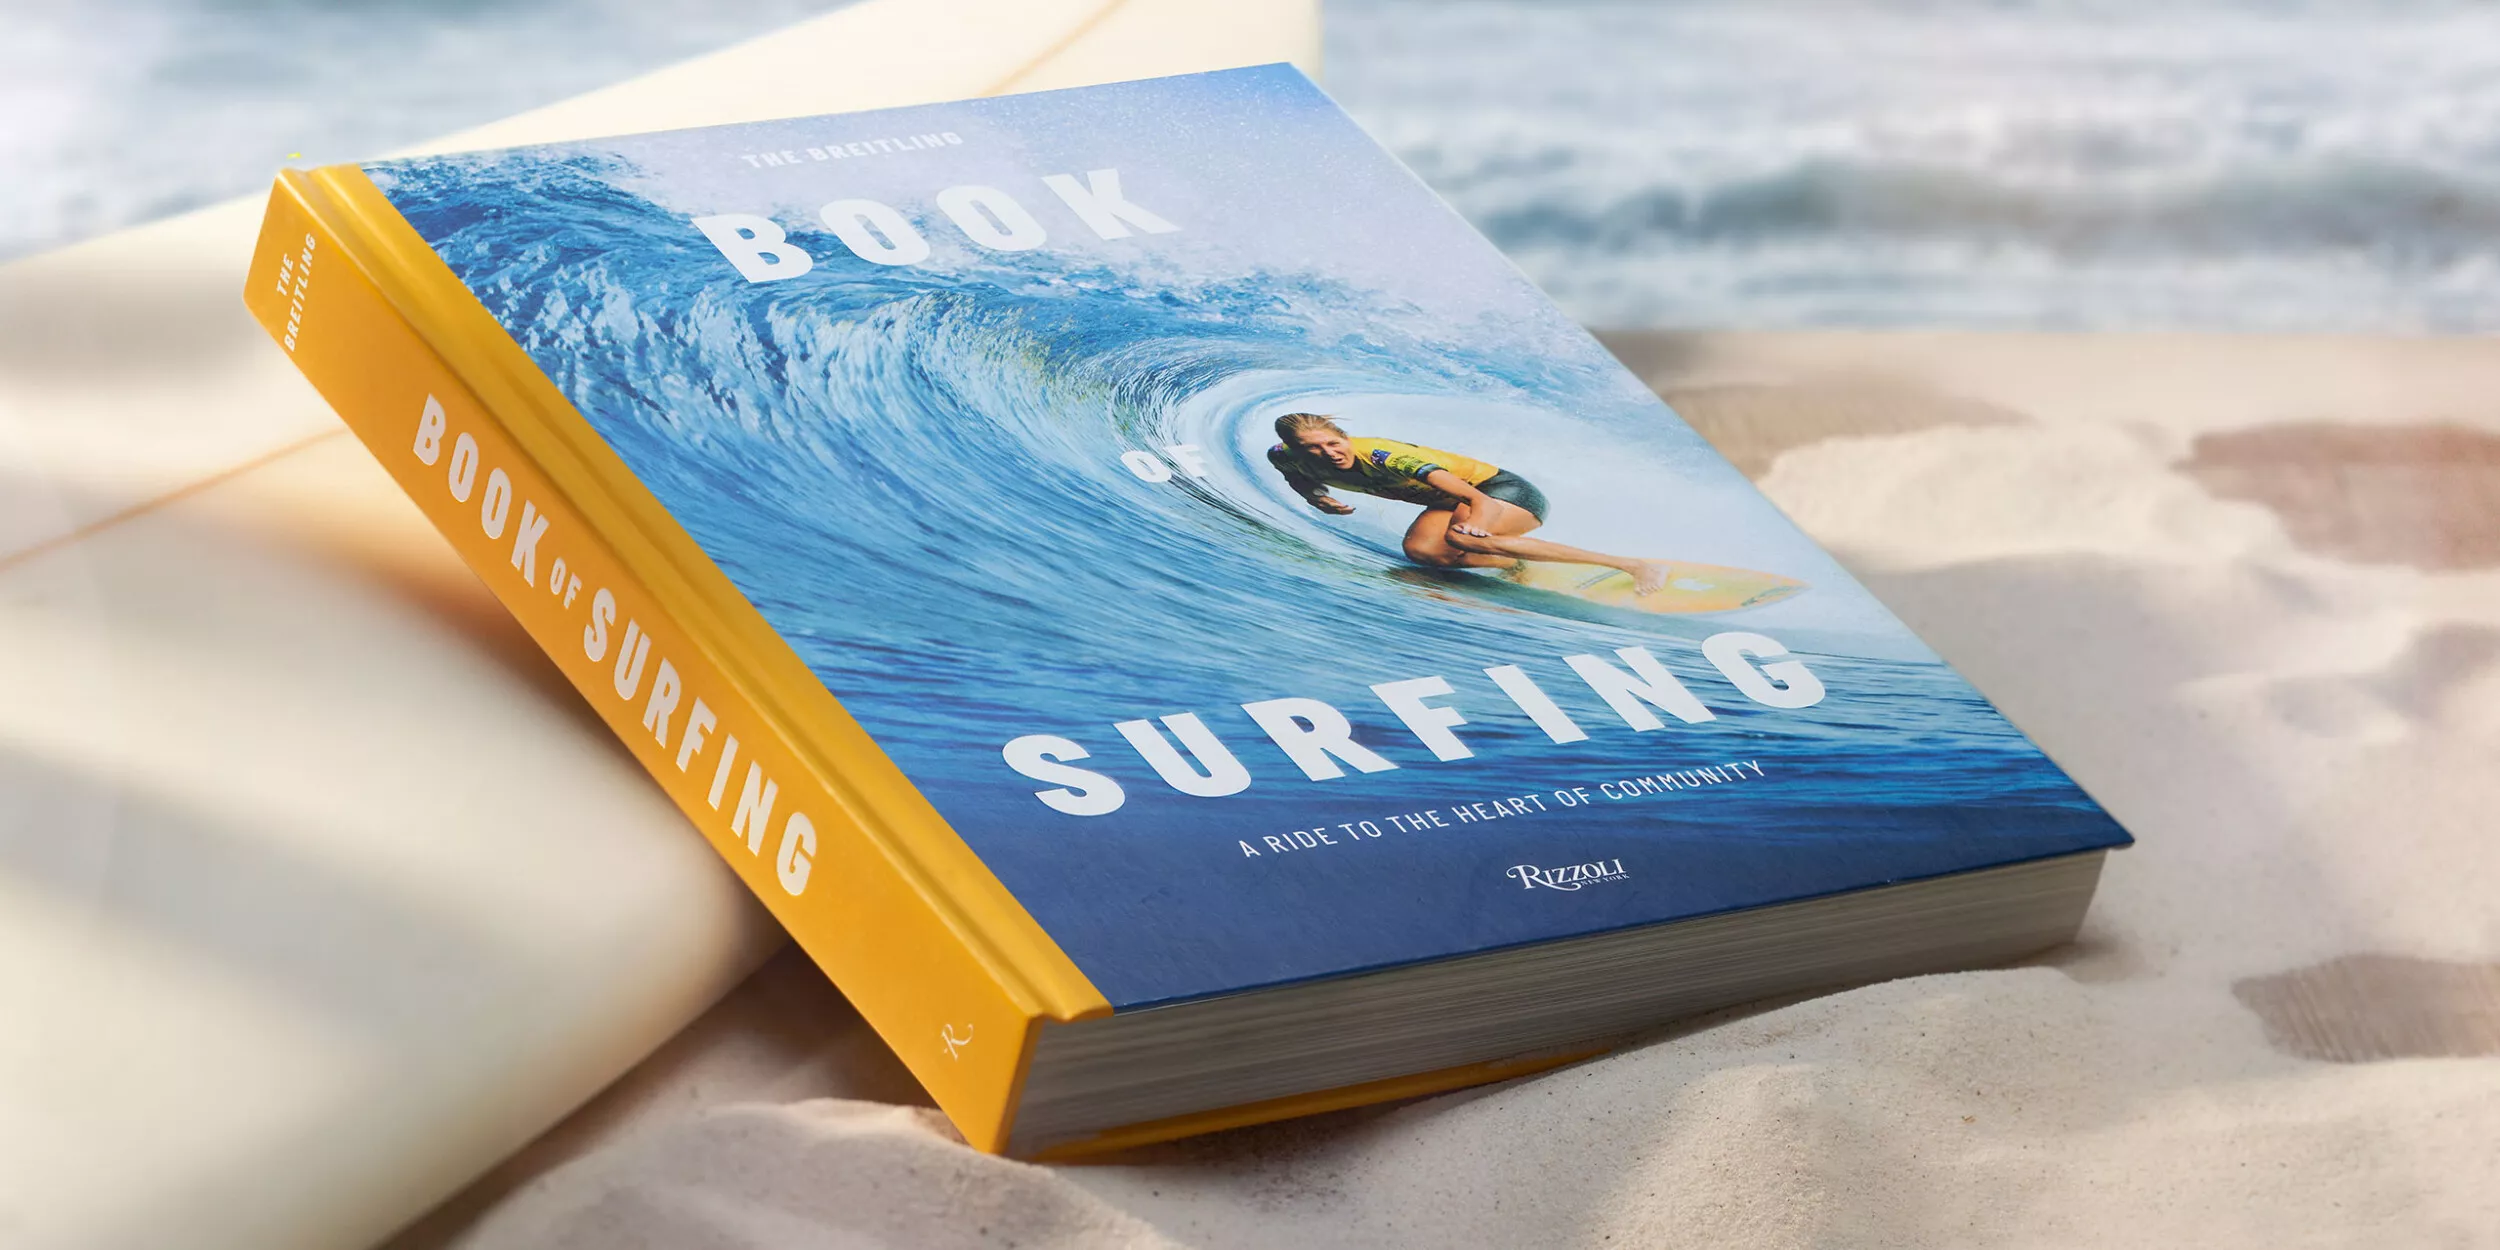 Breitling Explores Global Surfing Culture in New Book